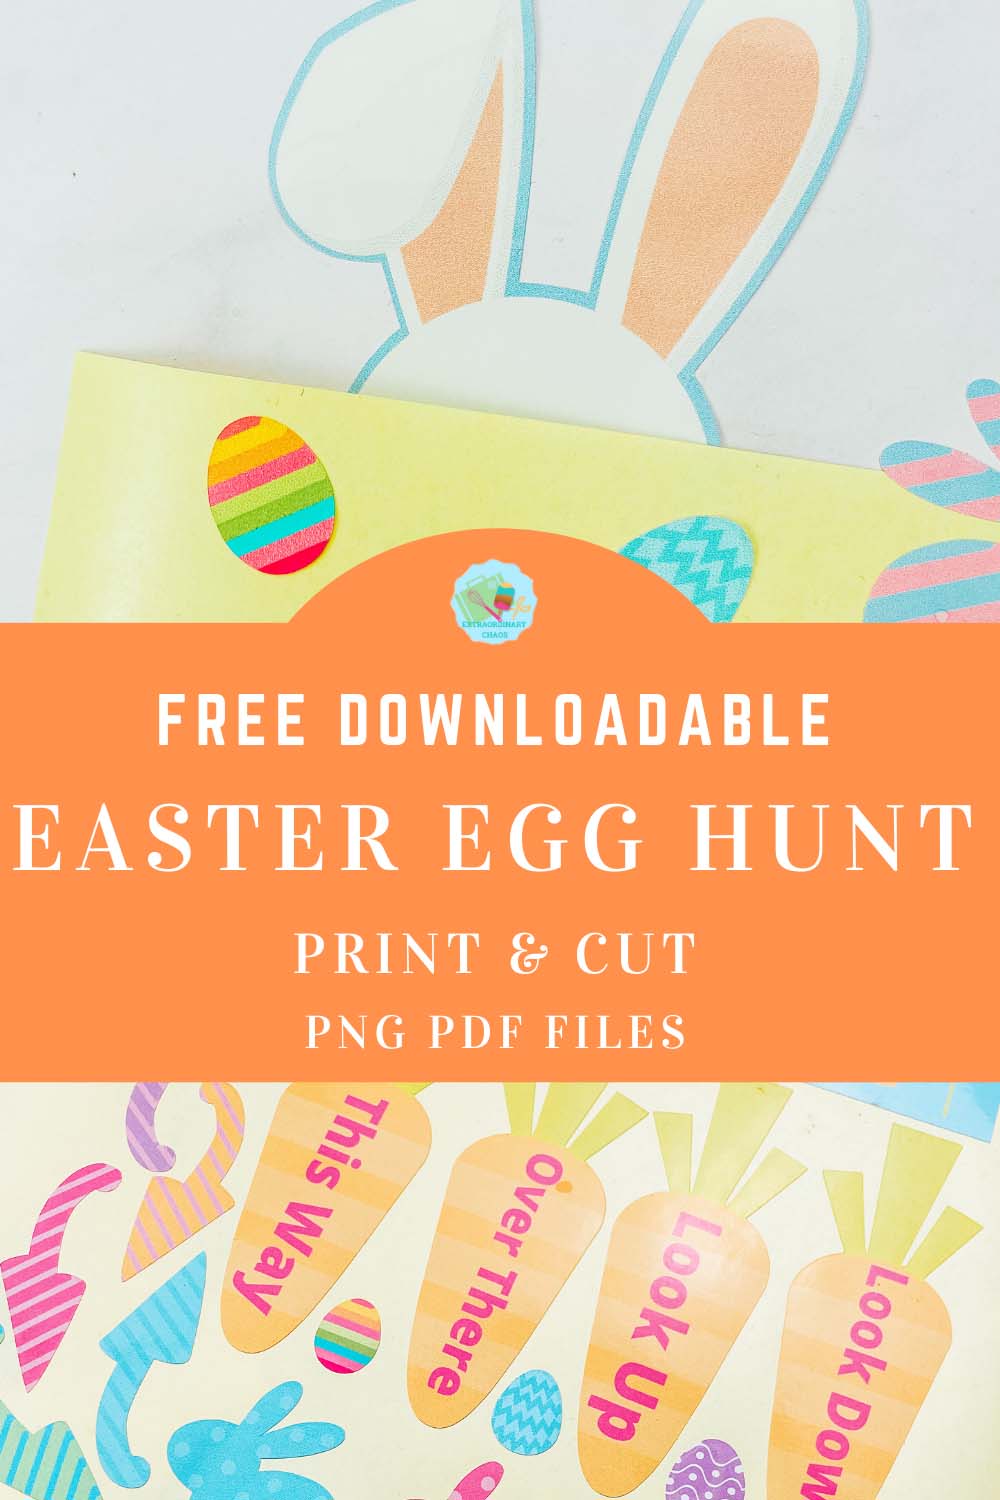 Free downloadable Easter egg hunt stickers to print and cut of cut out by hand-2